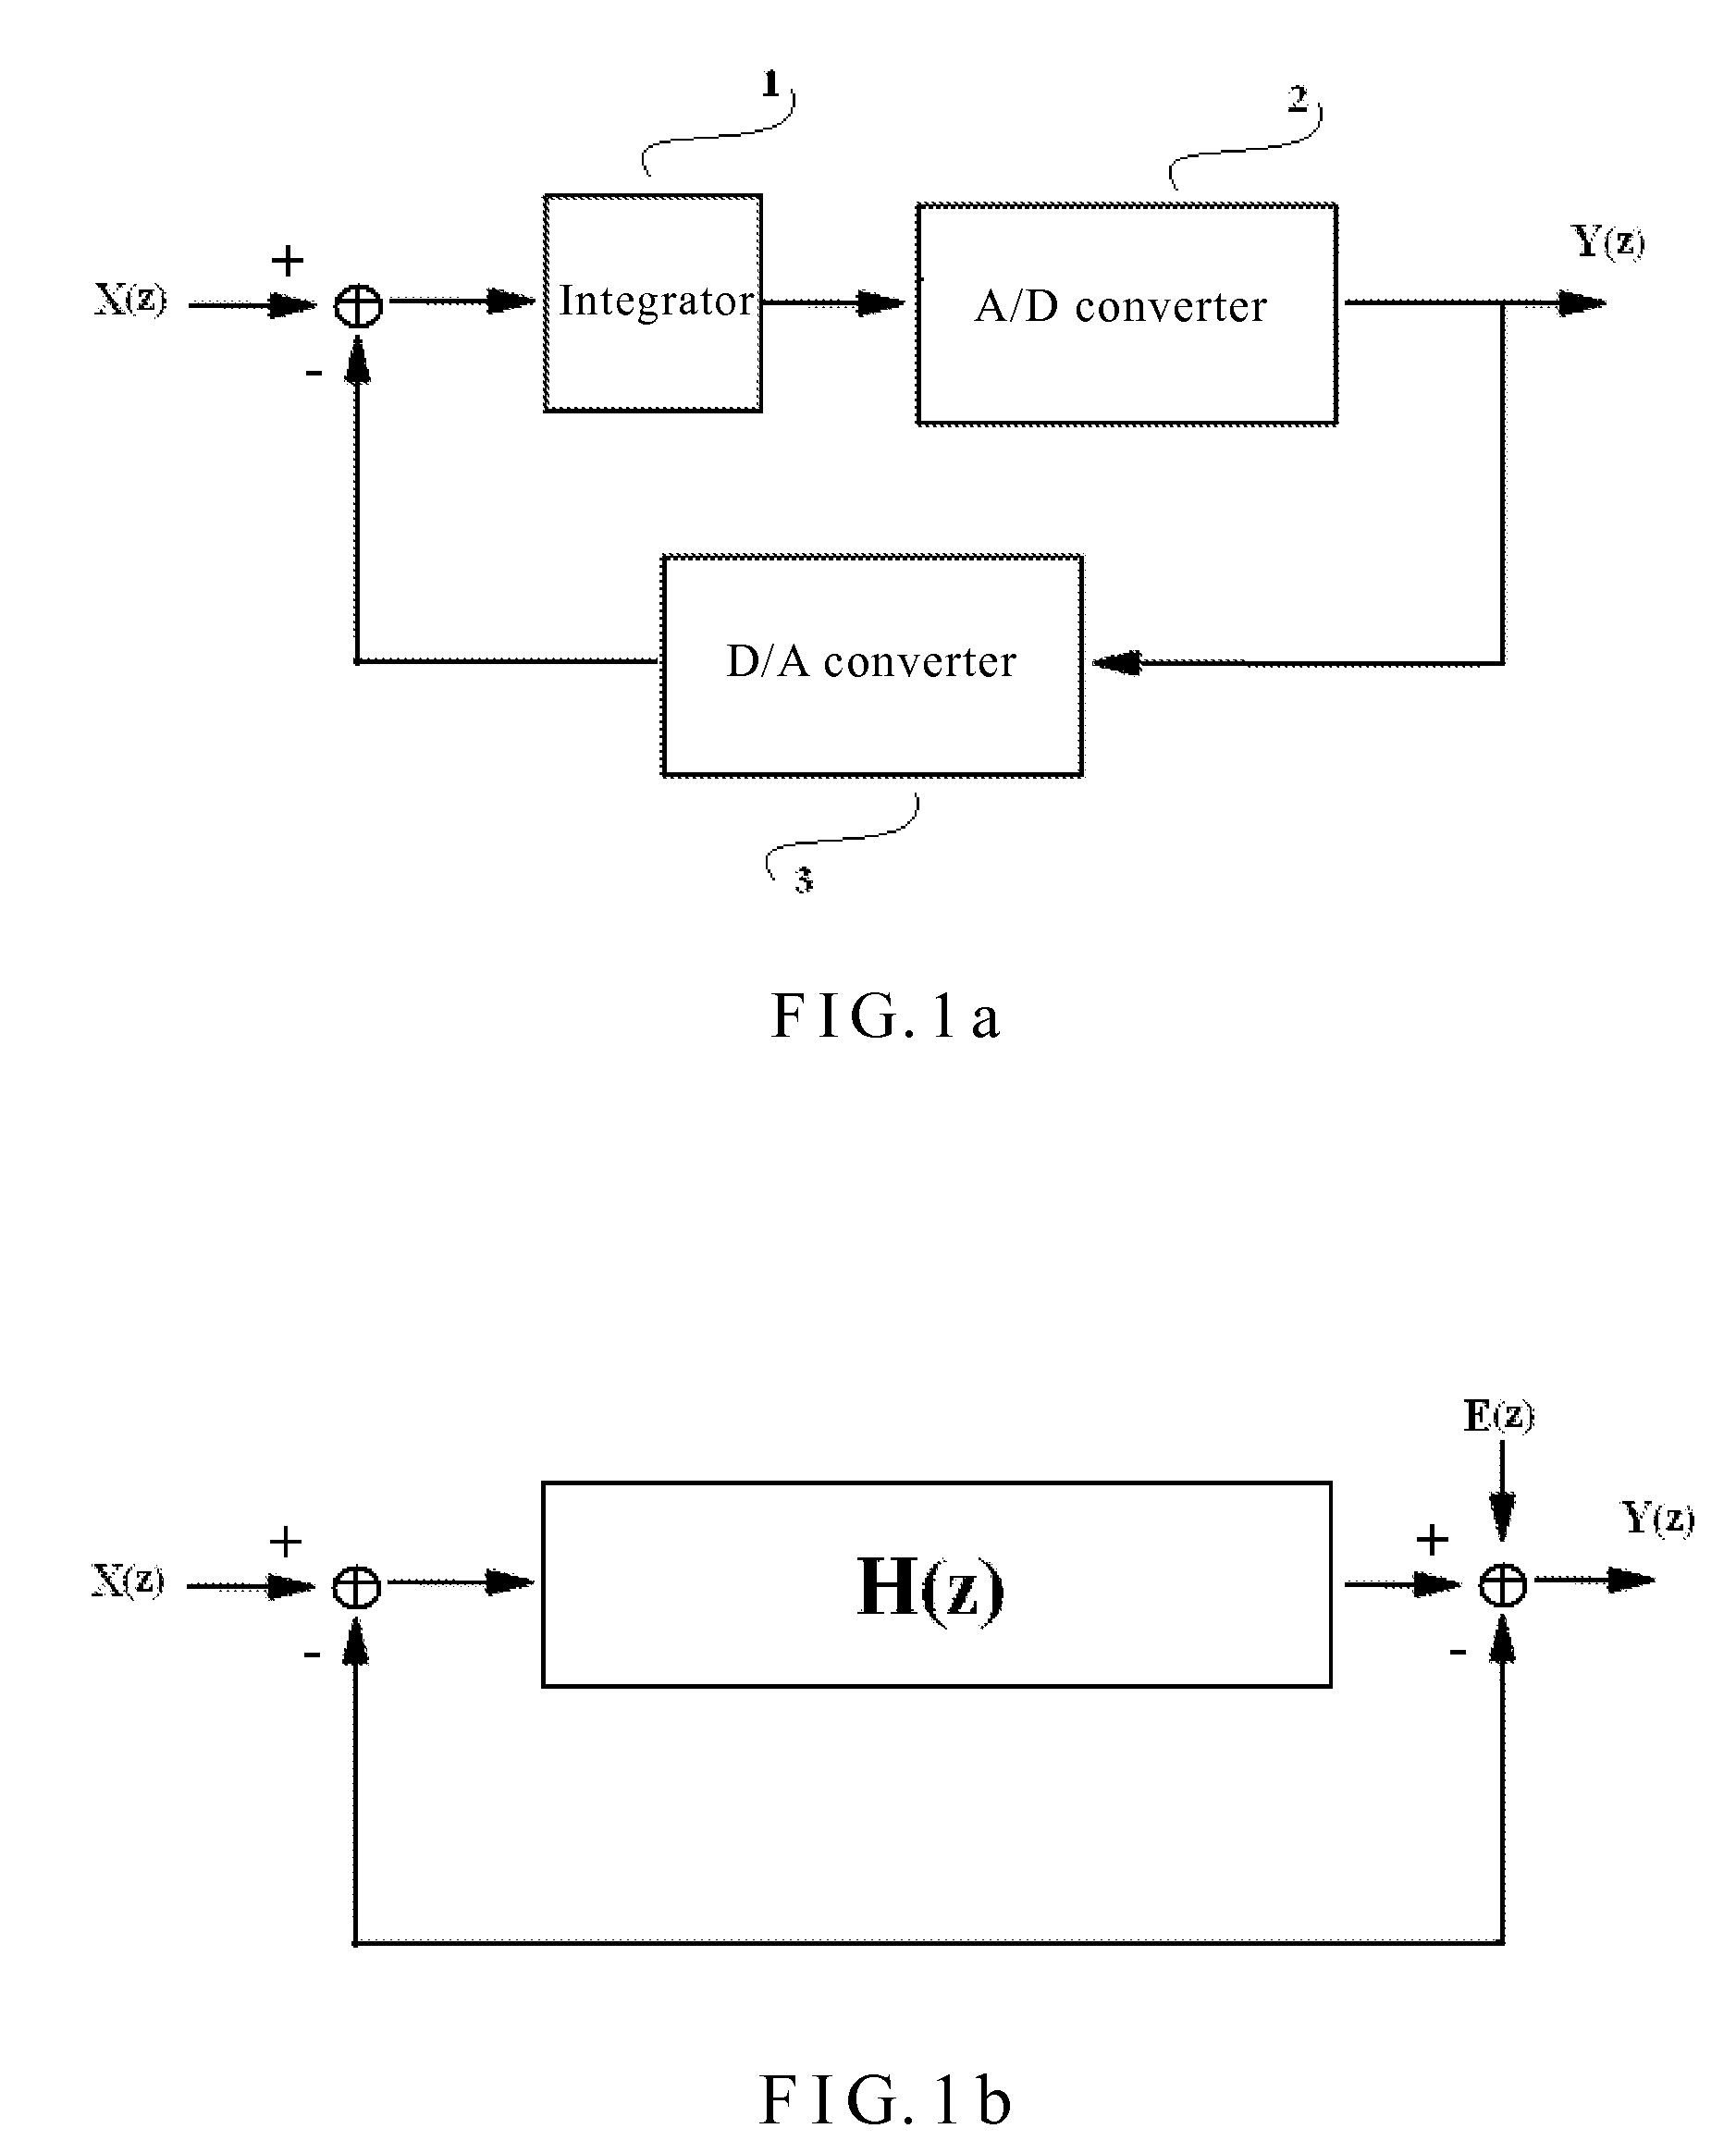 Device for accurately measuring amplifier's open-loop gain with digital stimuli